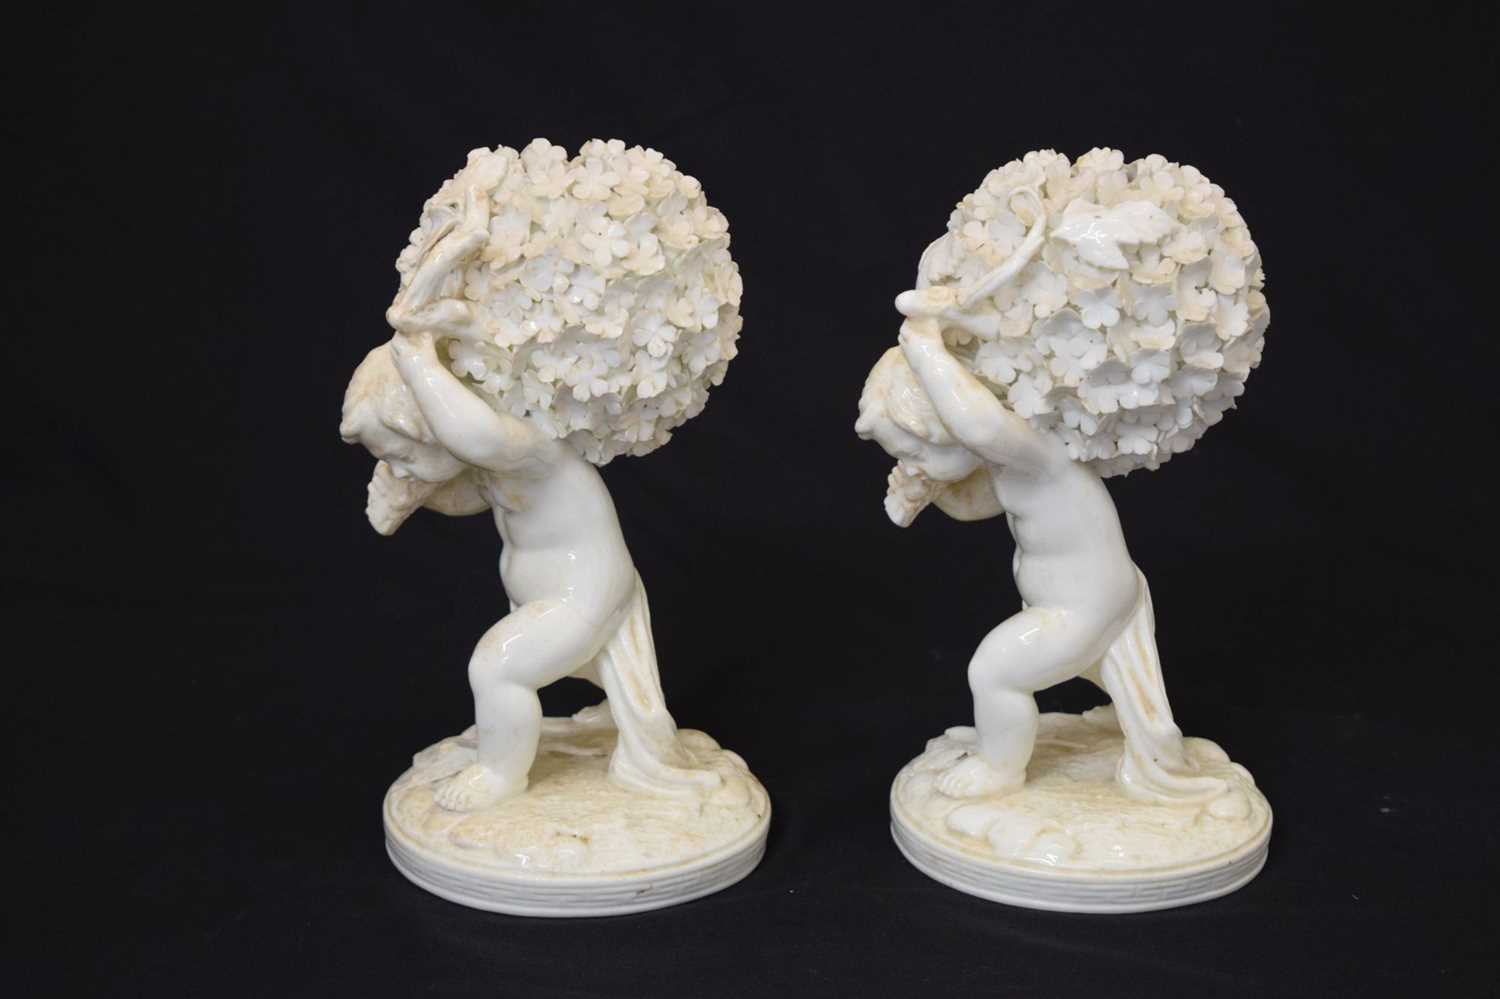 Pair of late 19th century Moore Brothers porcelain figures of cherubs - Image 4 of 9